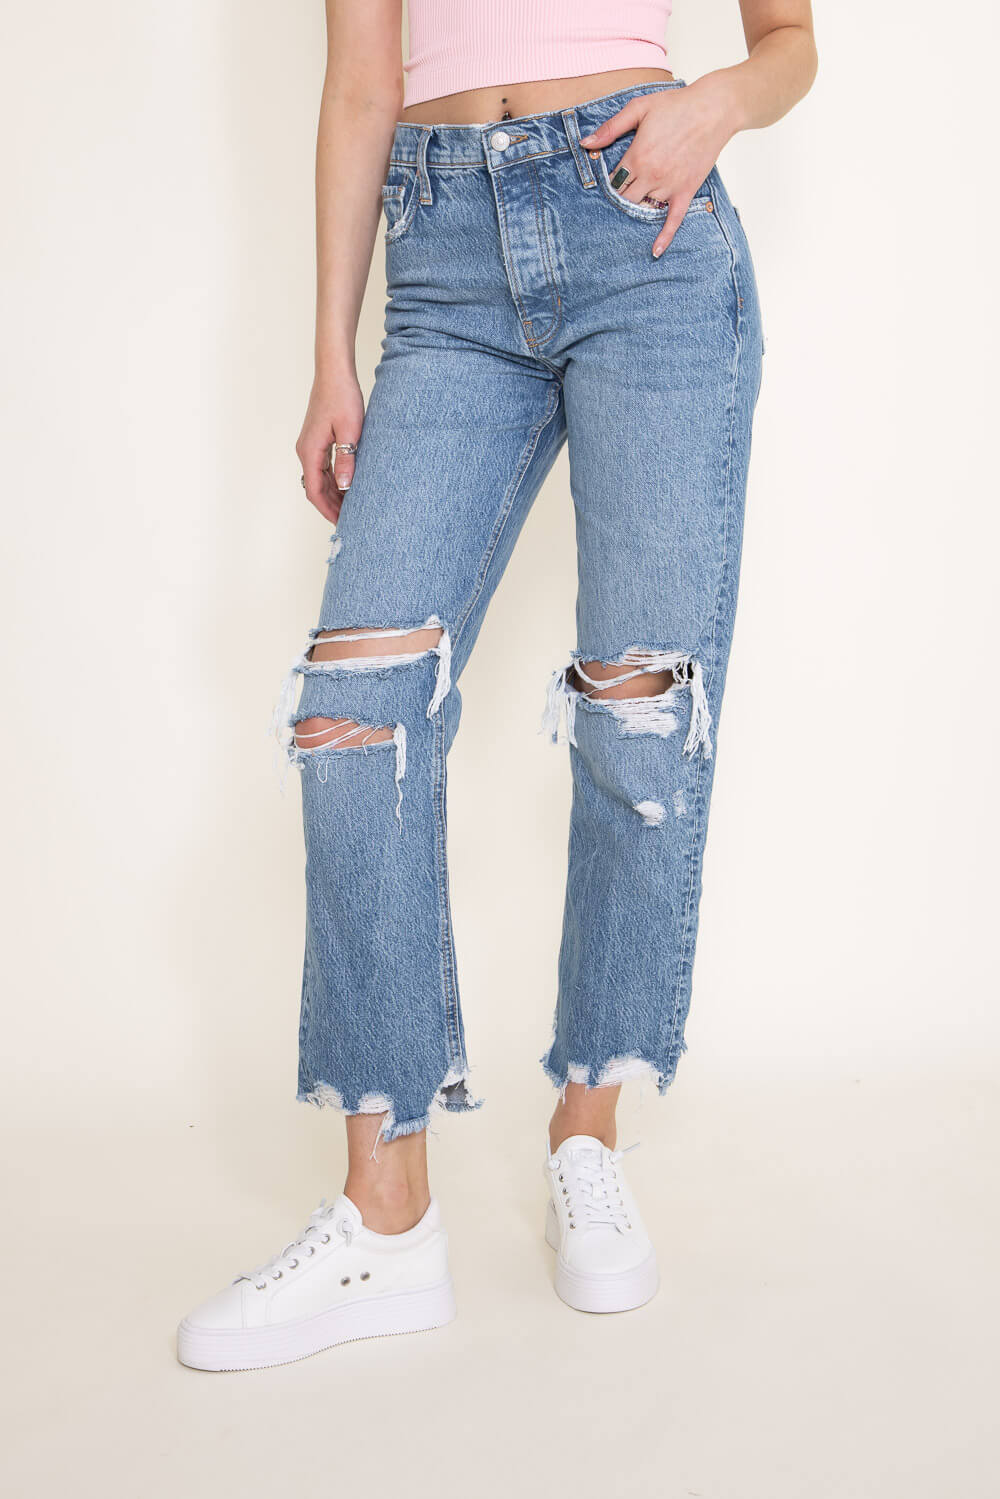 Free People Tapered Baggy Boyfriend Jeans for Women | OB1299887-4269 ...